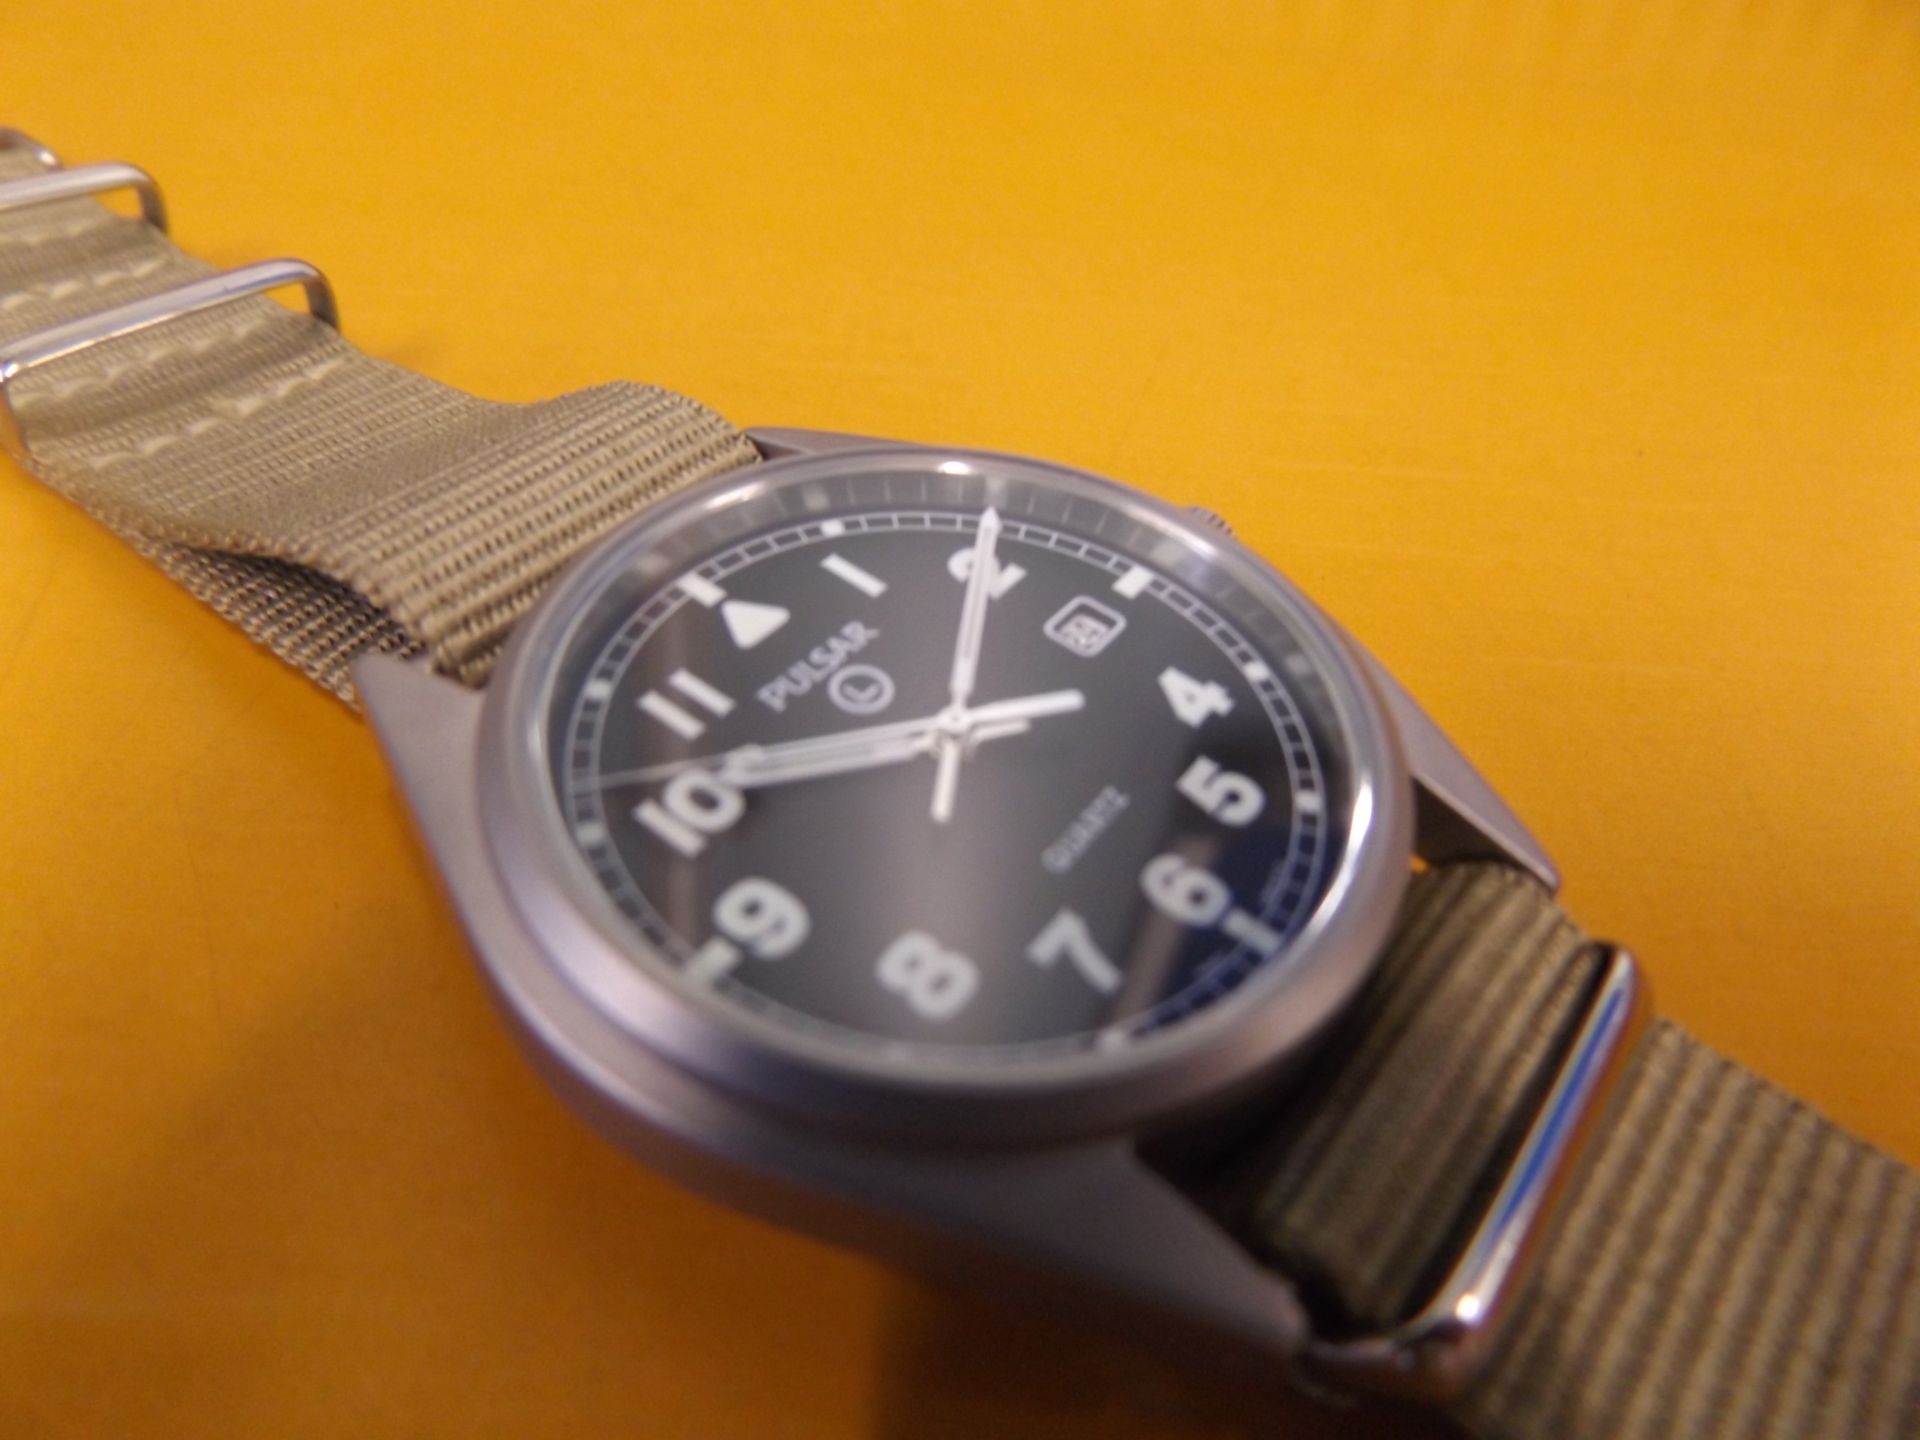 Pulsar G10 Wrist Watch - Afghan Issue - Image 4 of 8